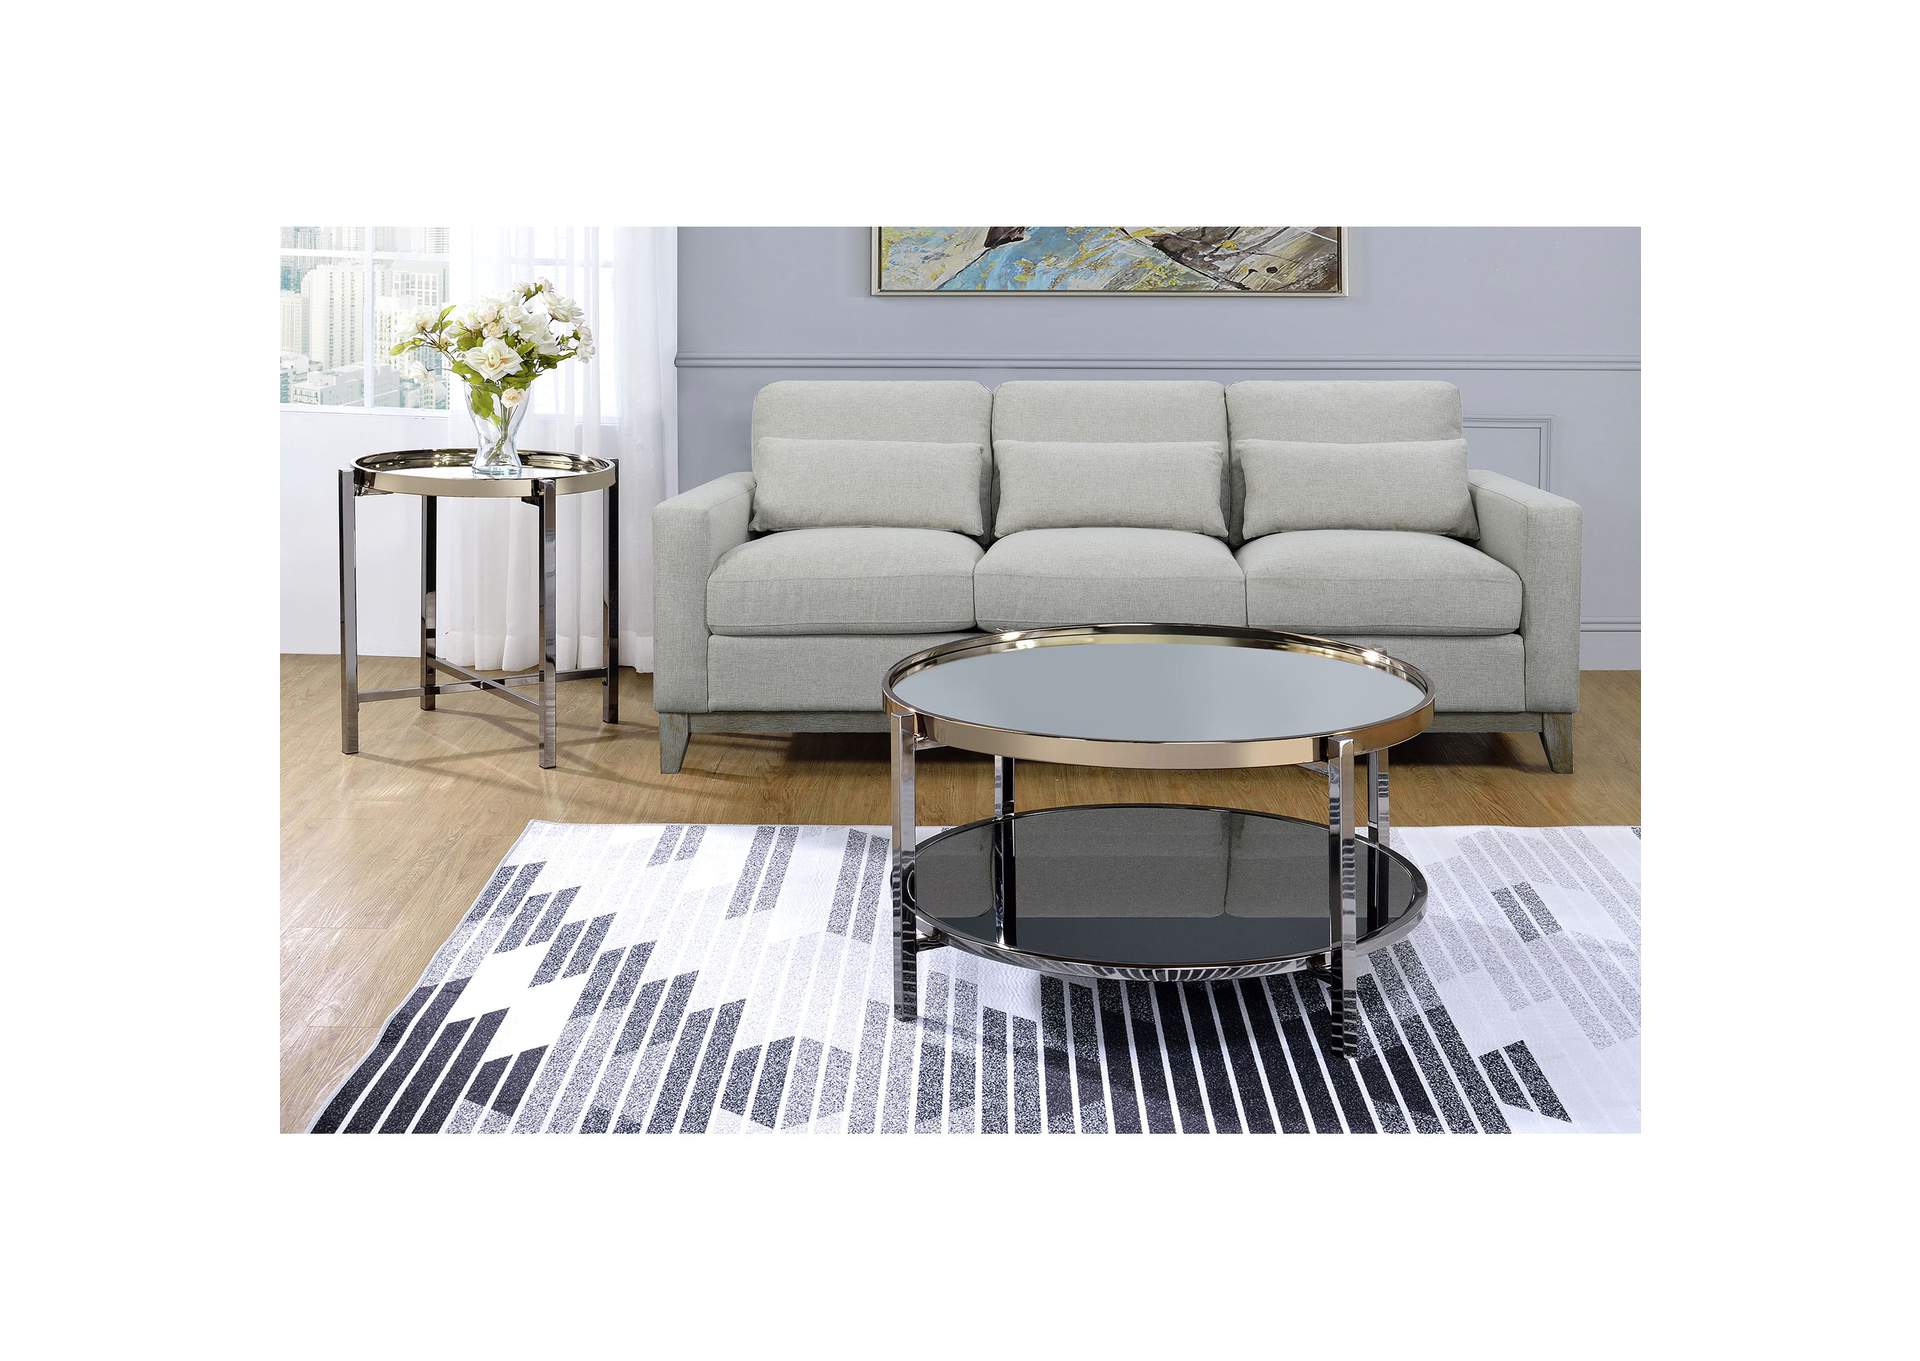 Edith C - 1112 Coffee Table,Elements